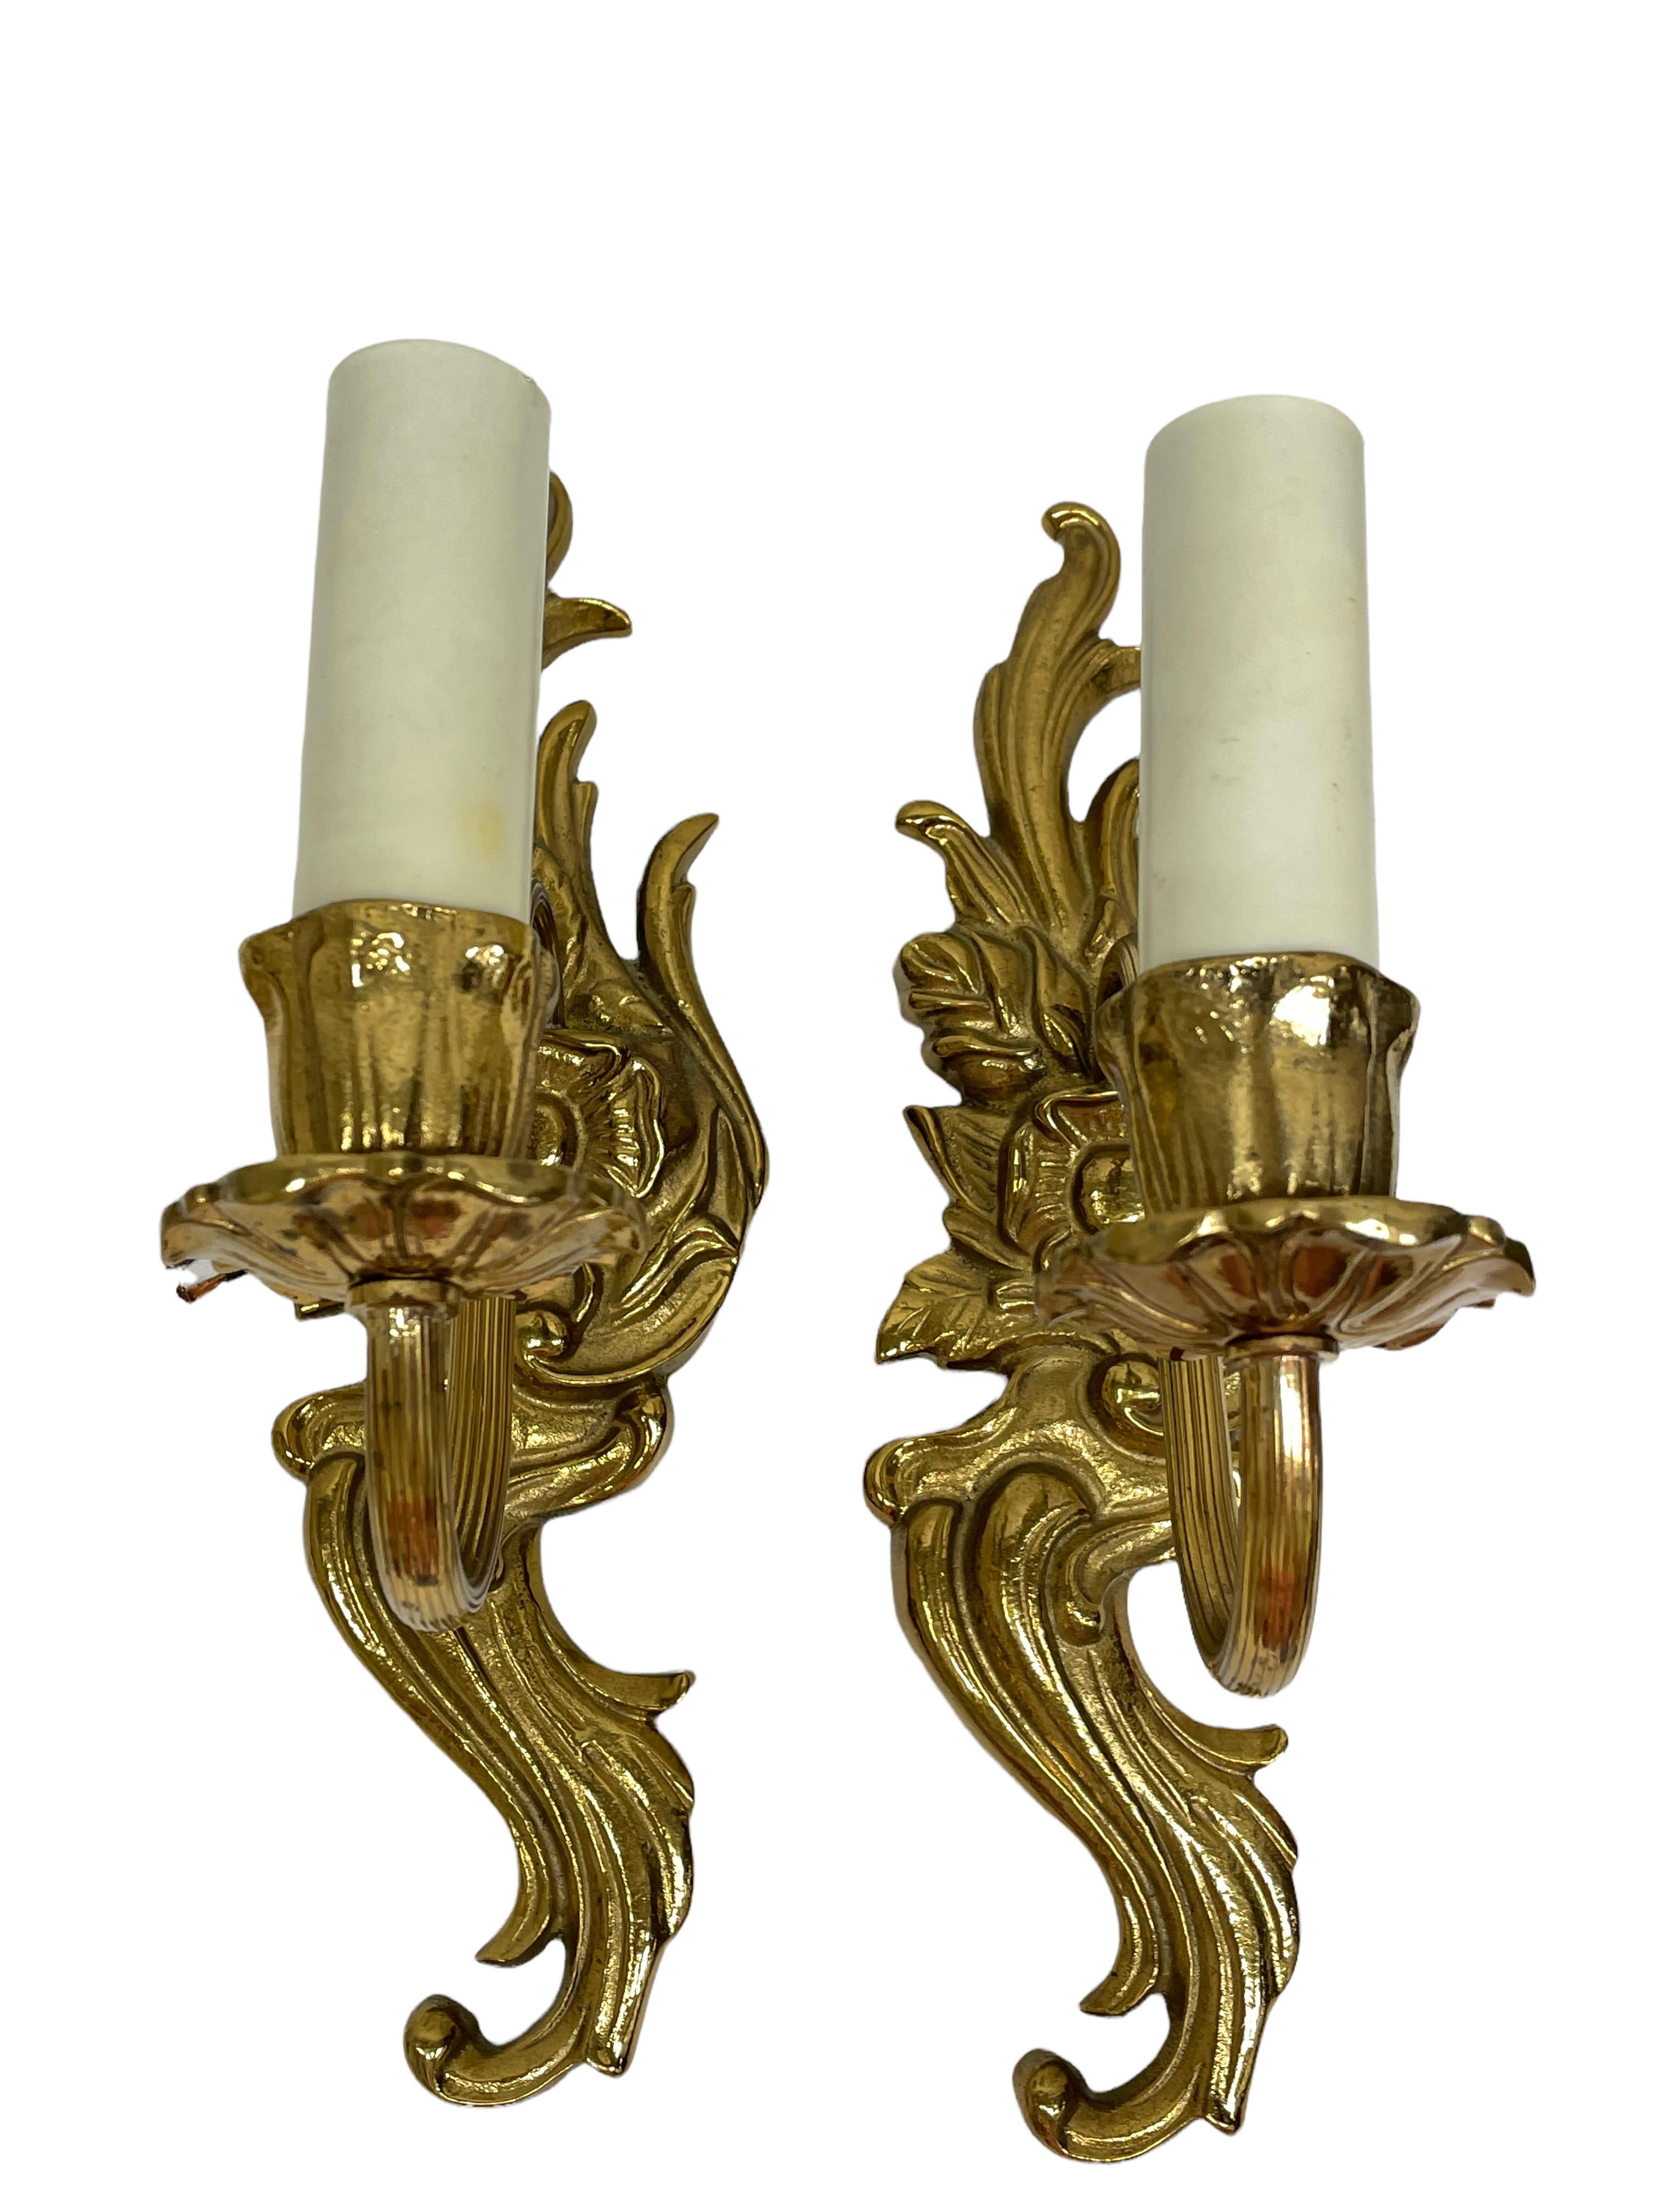 Pair of nice sconces. Each fixture requires a European E14 candelabra bulb, bulb up to 40 watts. Each wall light has a beautiful patina and gives each room an eclectic statement. Made of bronze metal. Nice addition to any room. Found at an Estate